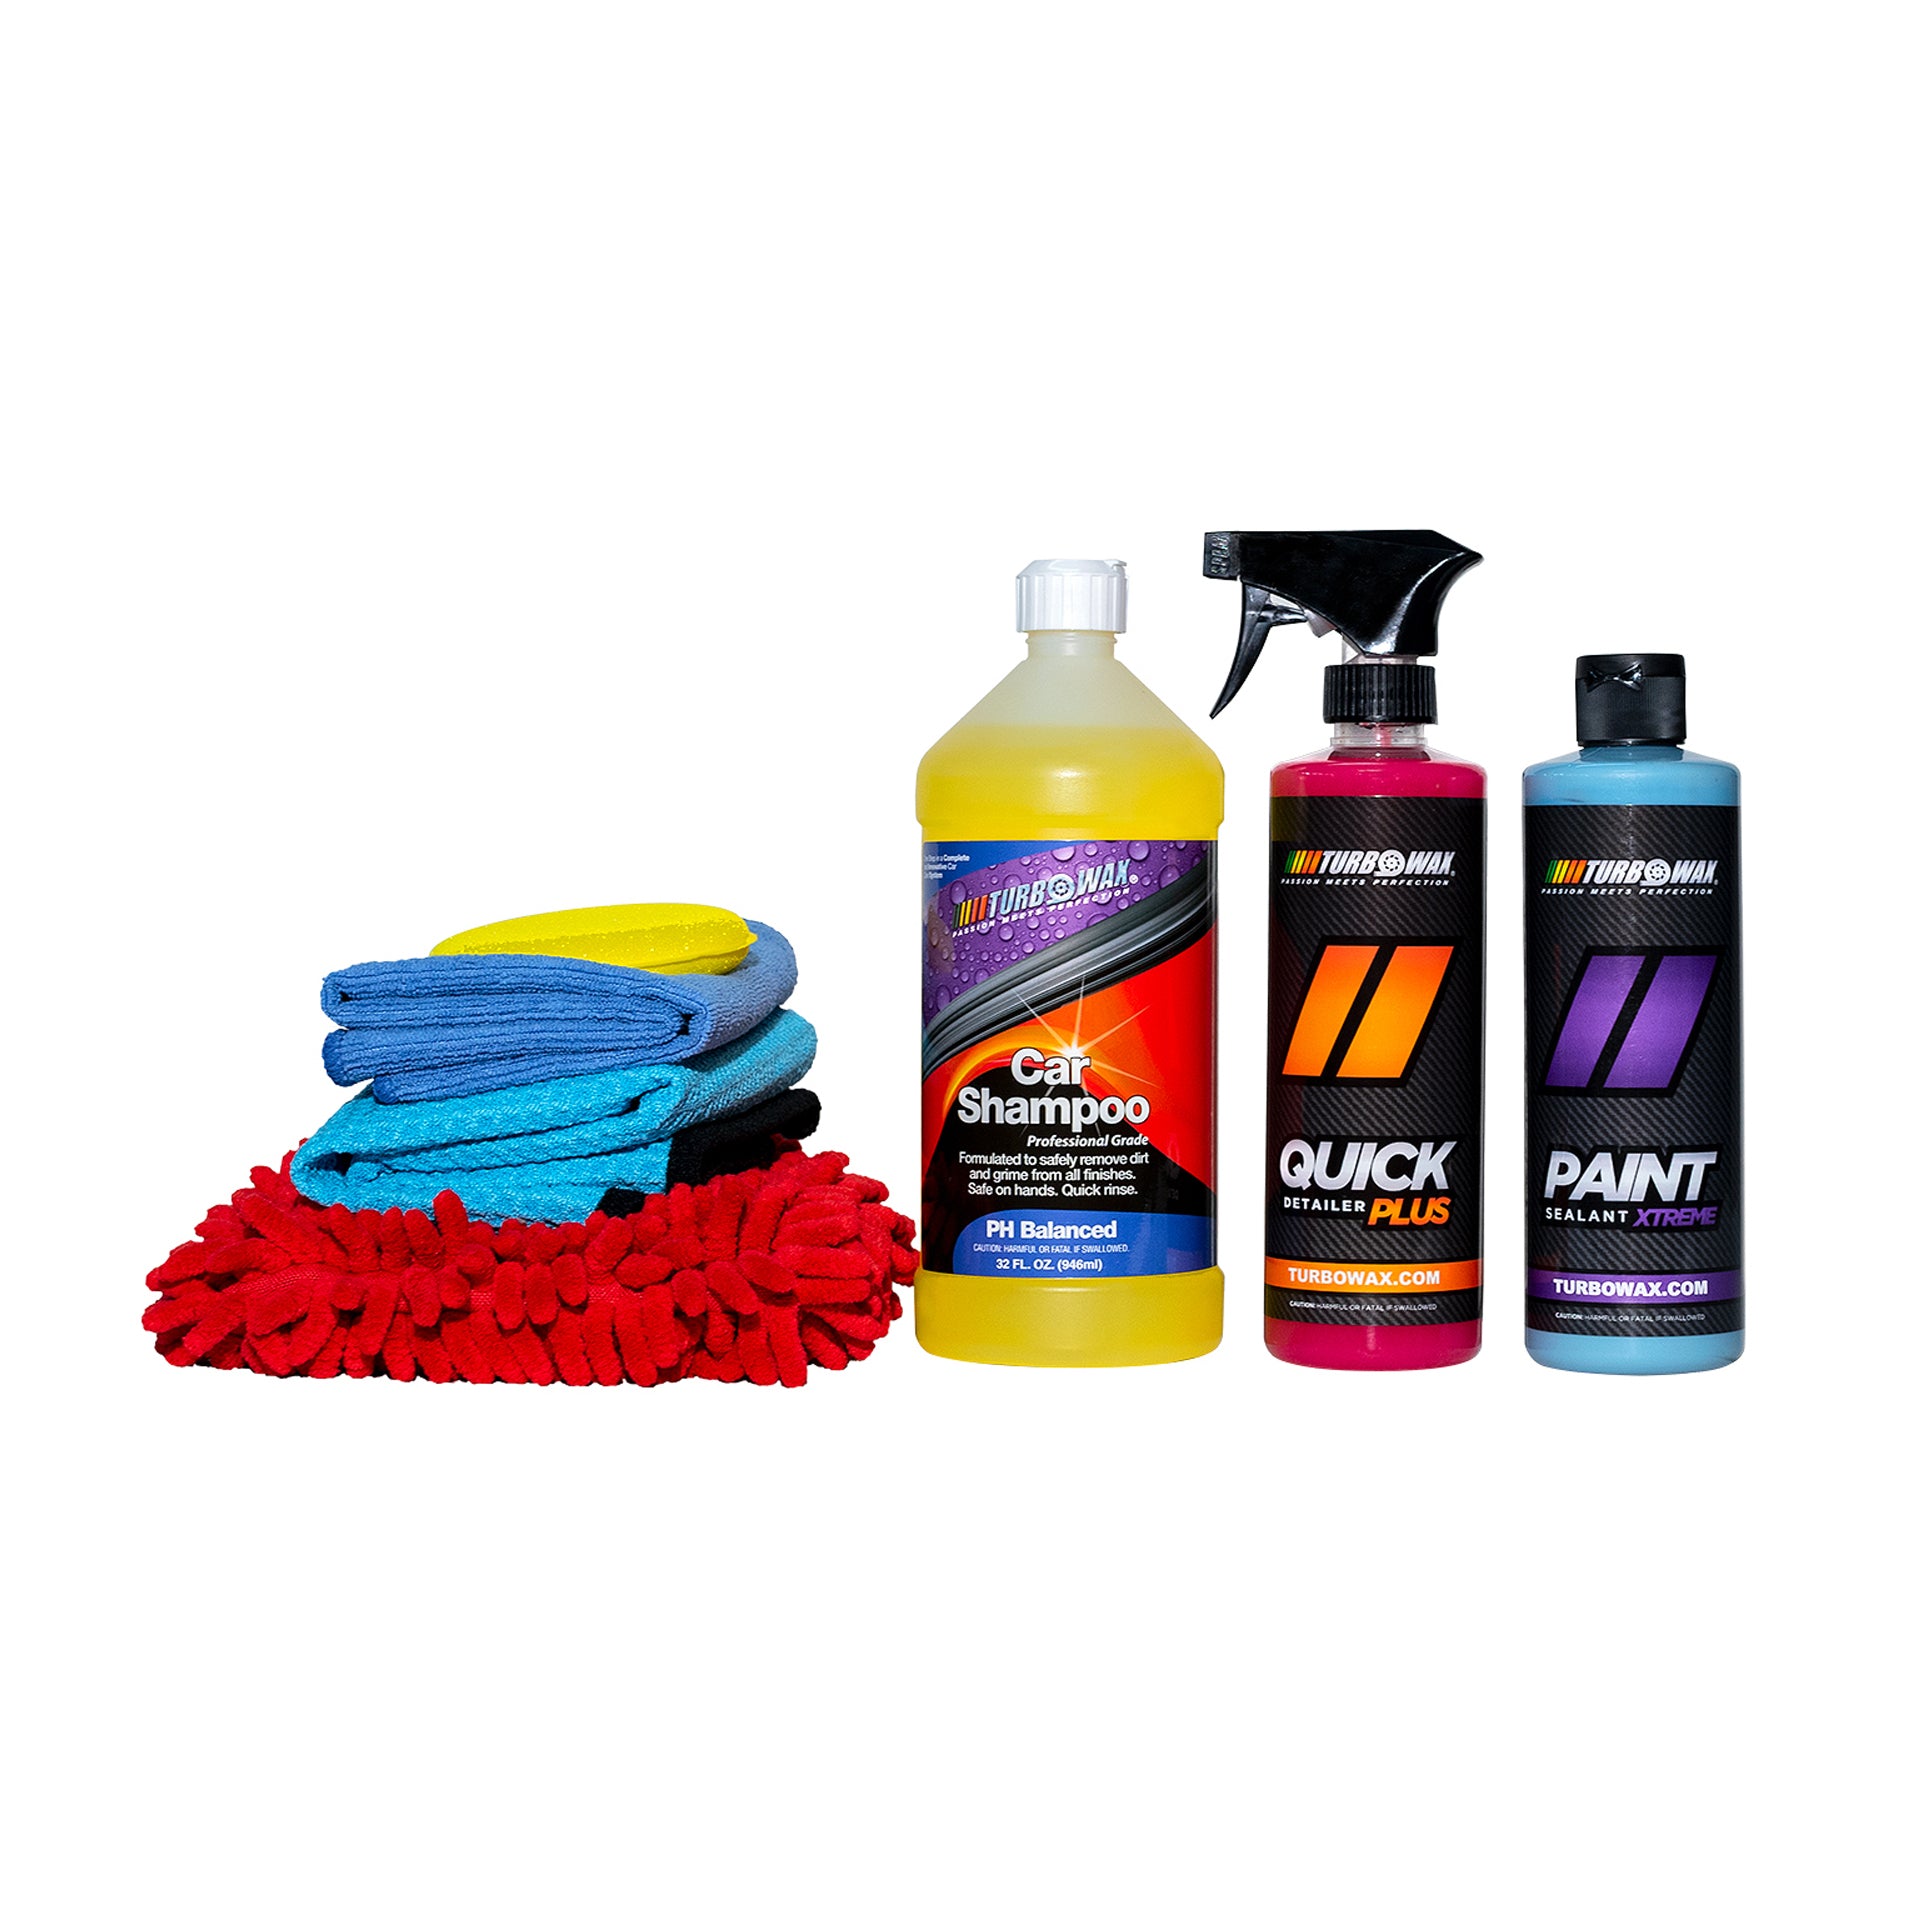 Ceramic Wax For Cars Car Cleaning Supplies Polymer Paint Sealant